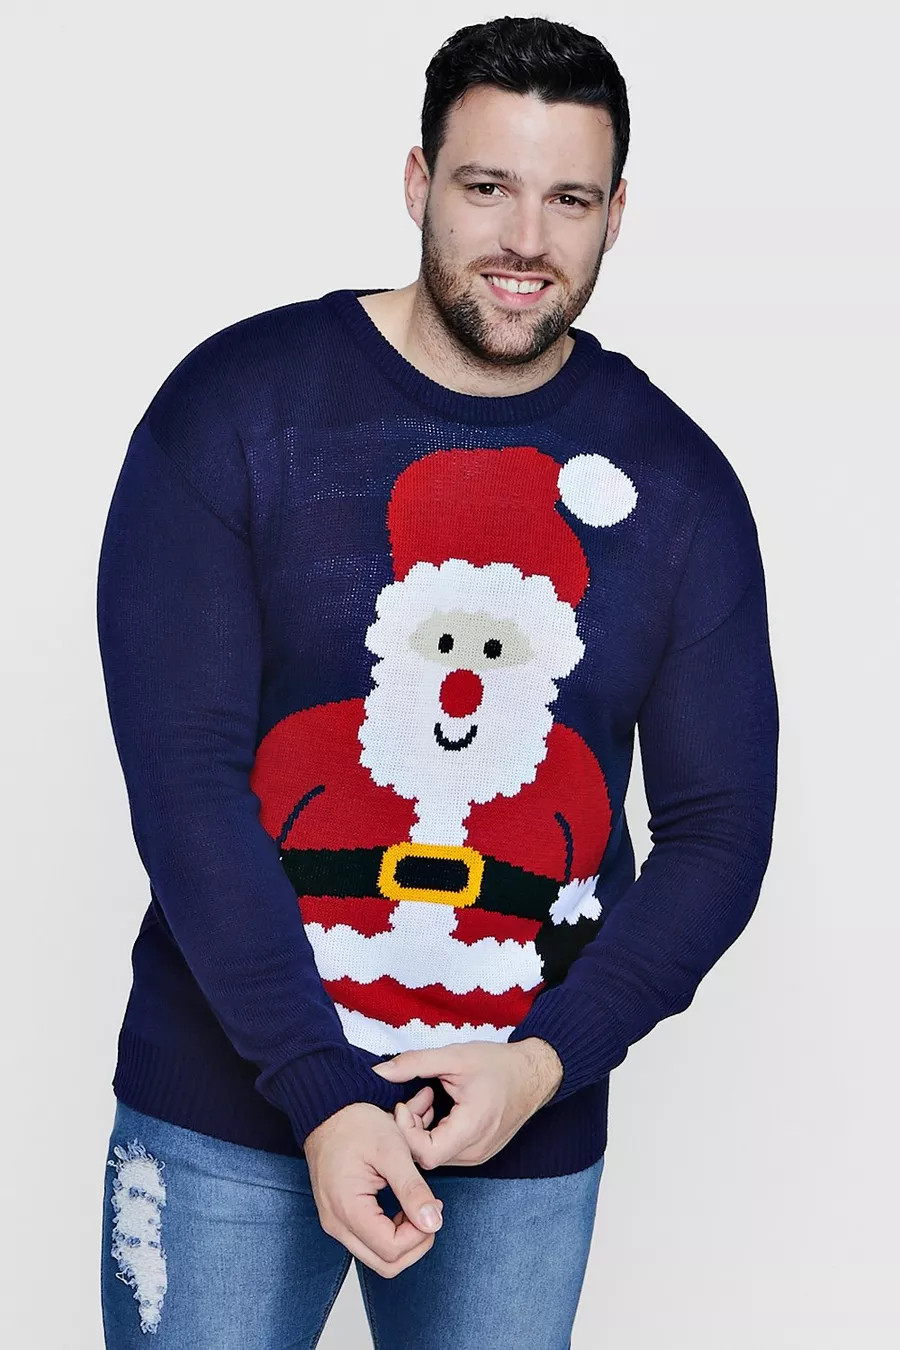 plus size christmas t shirt about movie